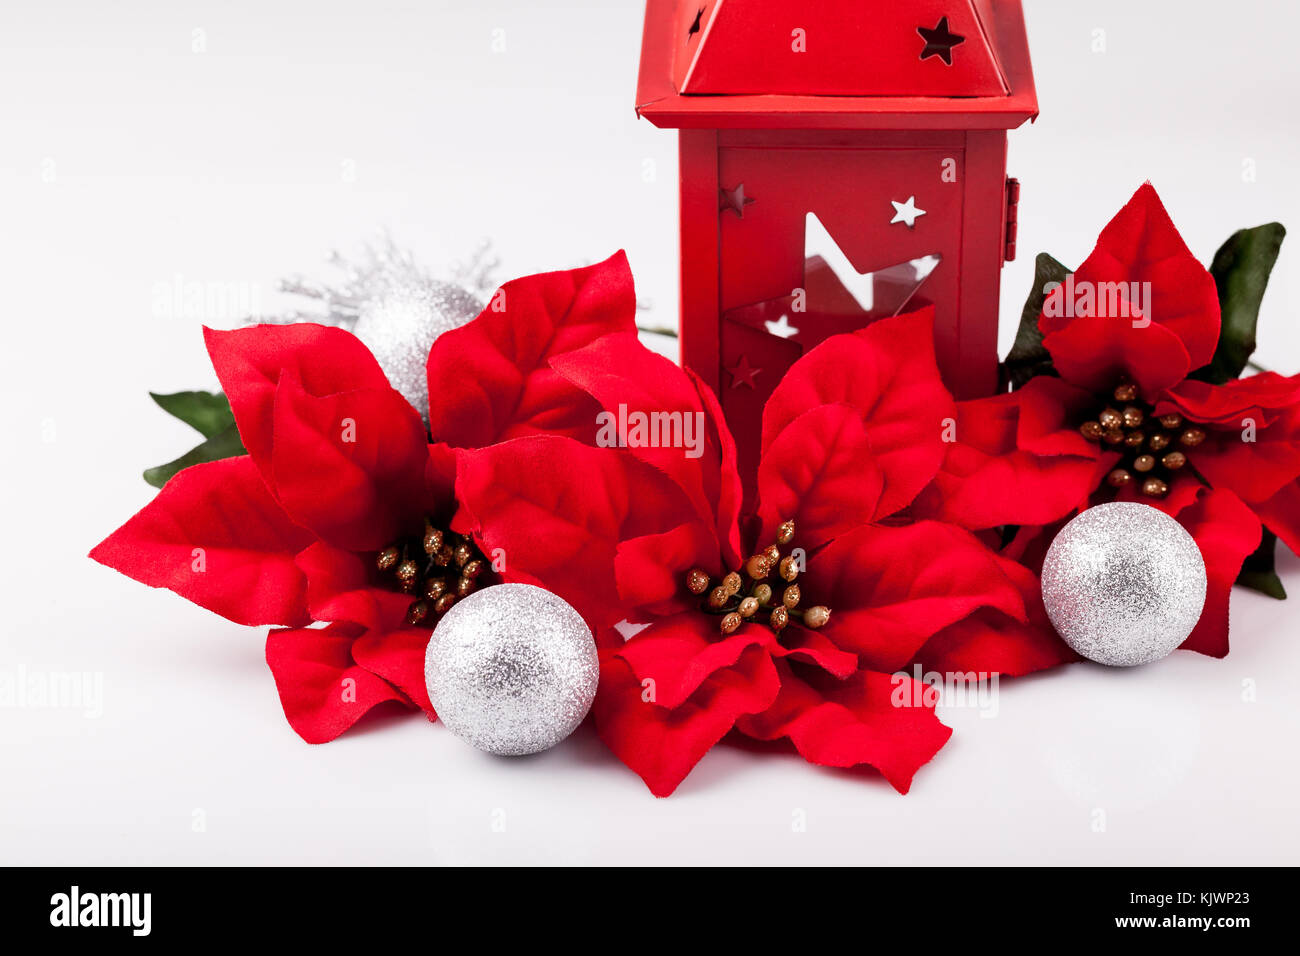 Christmas decoration, red poinsettia and silver baubles on a white background. Stock Photo